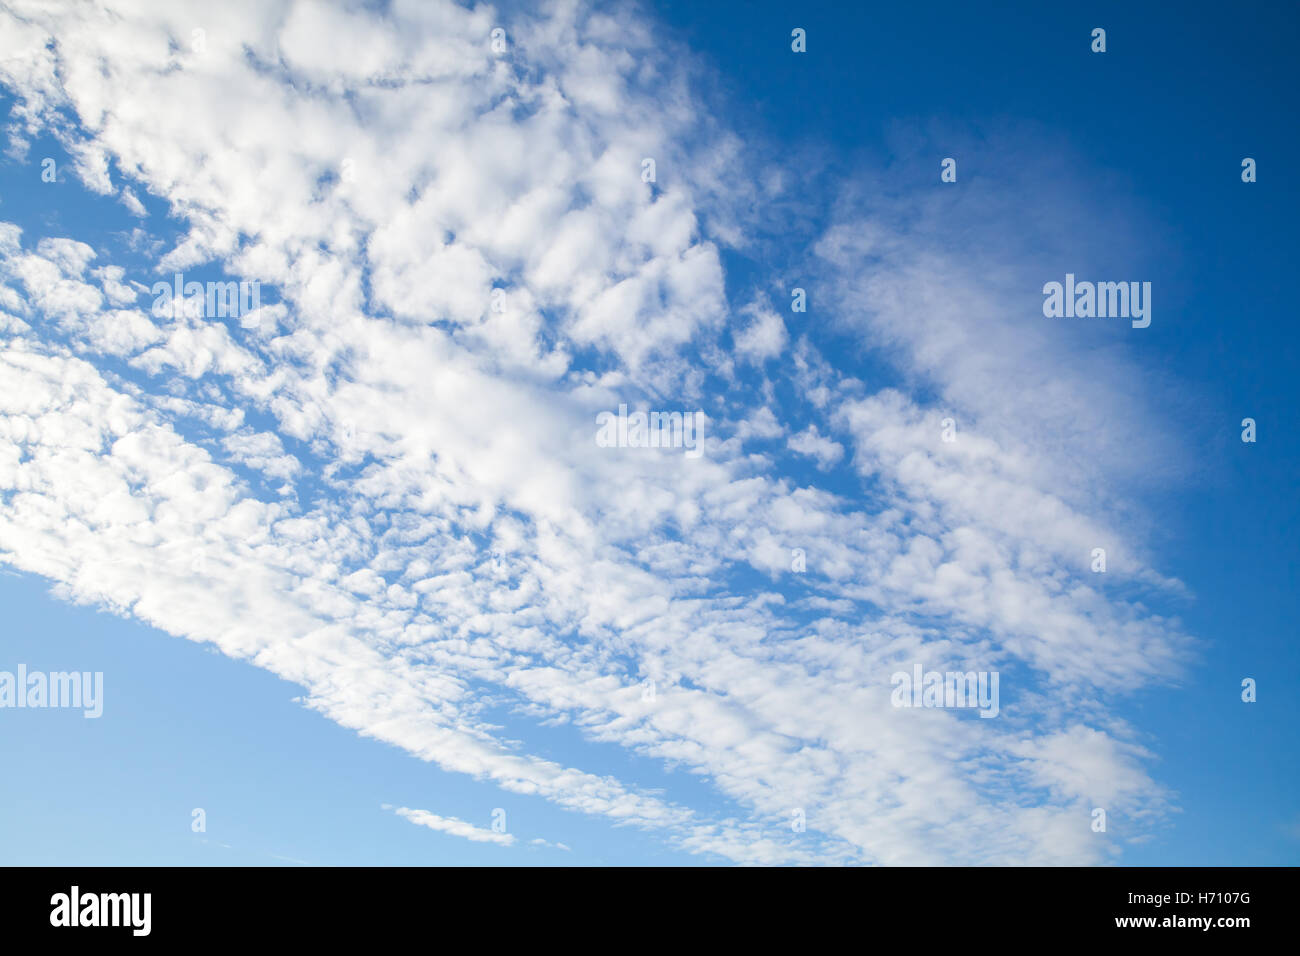 Natural blue sky with white altocumulus clouds at daytime, background photo texture Stock Photo